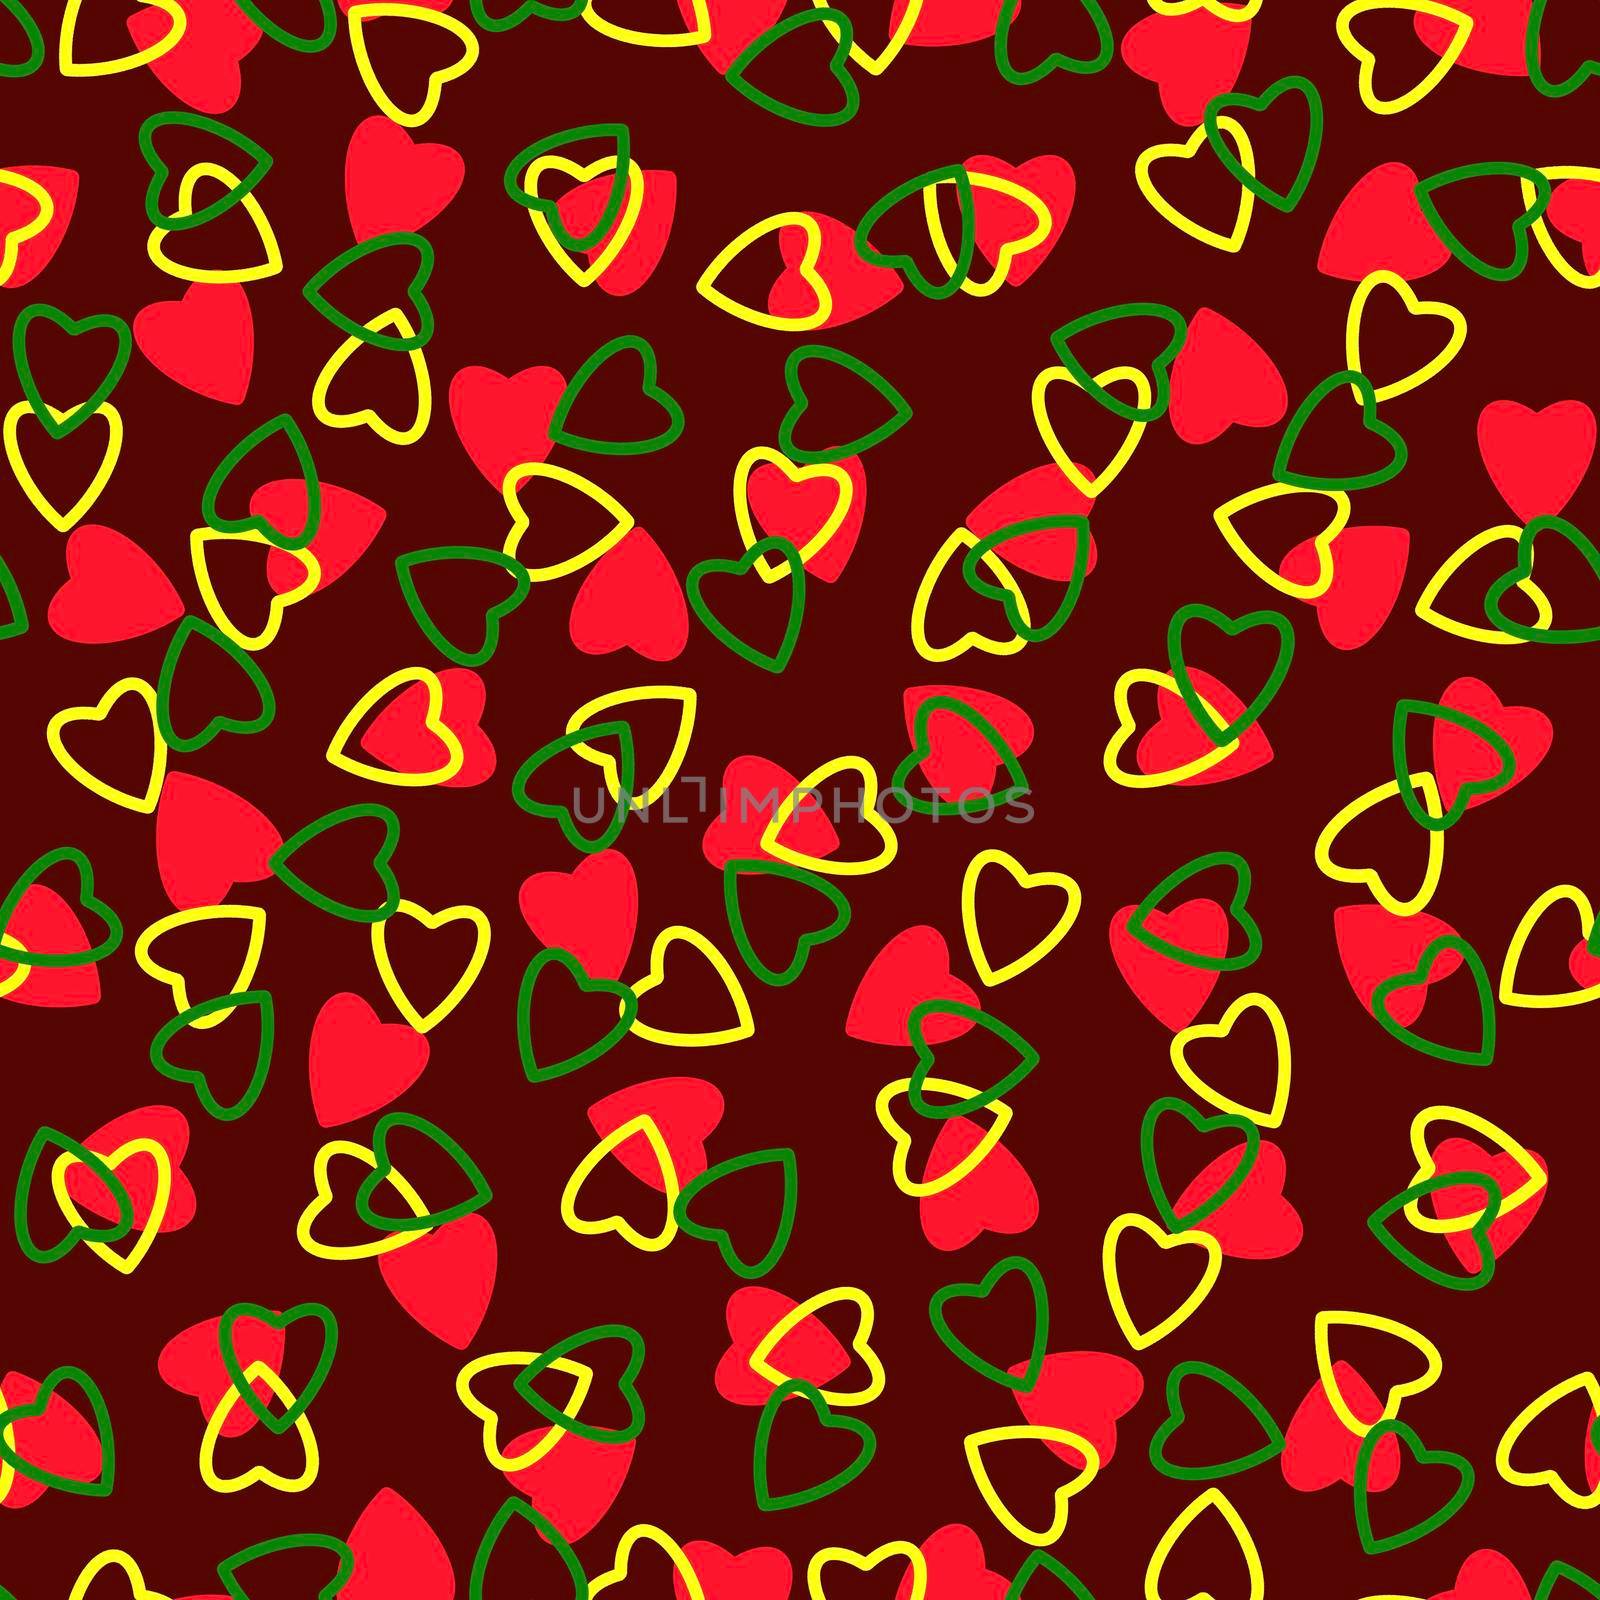 Simple hearts seamless pattern,endless chaotic texture made tiny heart silhouettes.Valentines,mothers day background.Yellow,red,burgundy.Great for Easter,wedding,scrapbook,gift wrapping paper,textiles